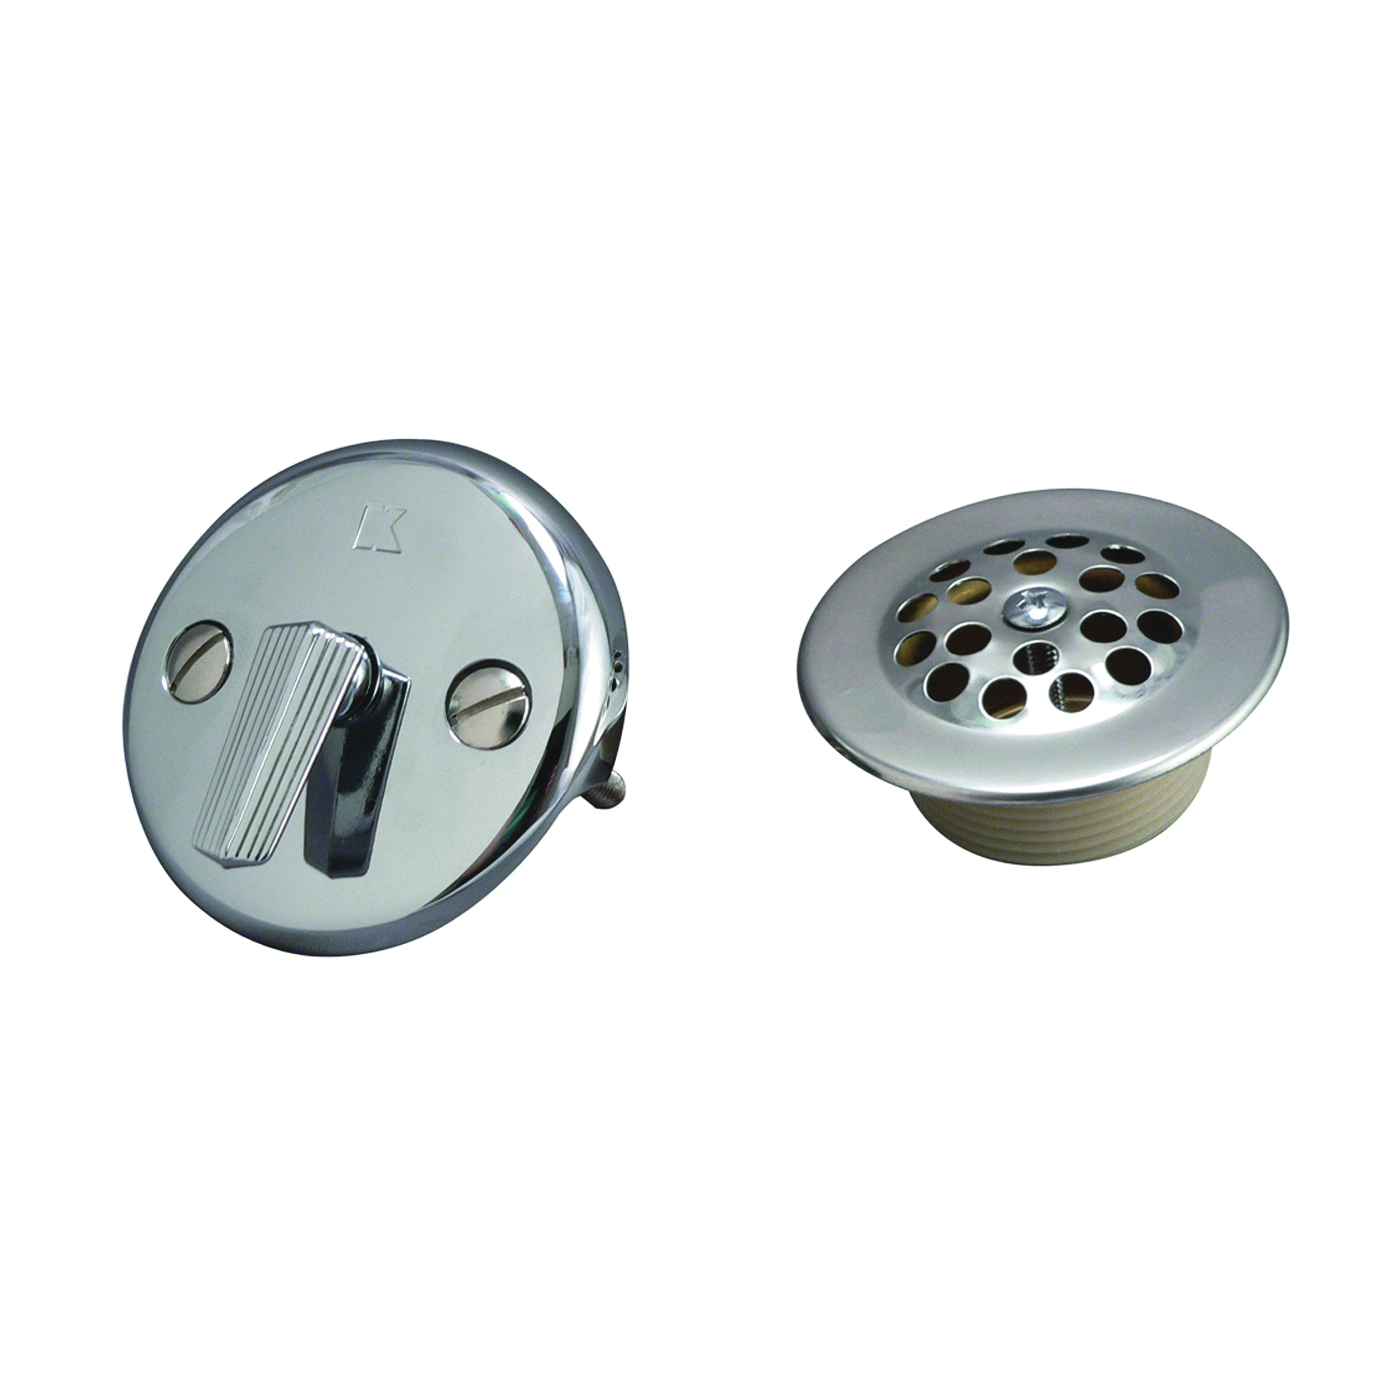 PP826-65 Trim Kit, Chrome, For: 1-3/8 in, 1-1/2 in Bath Drains